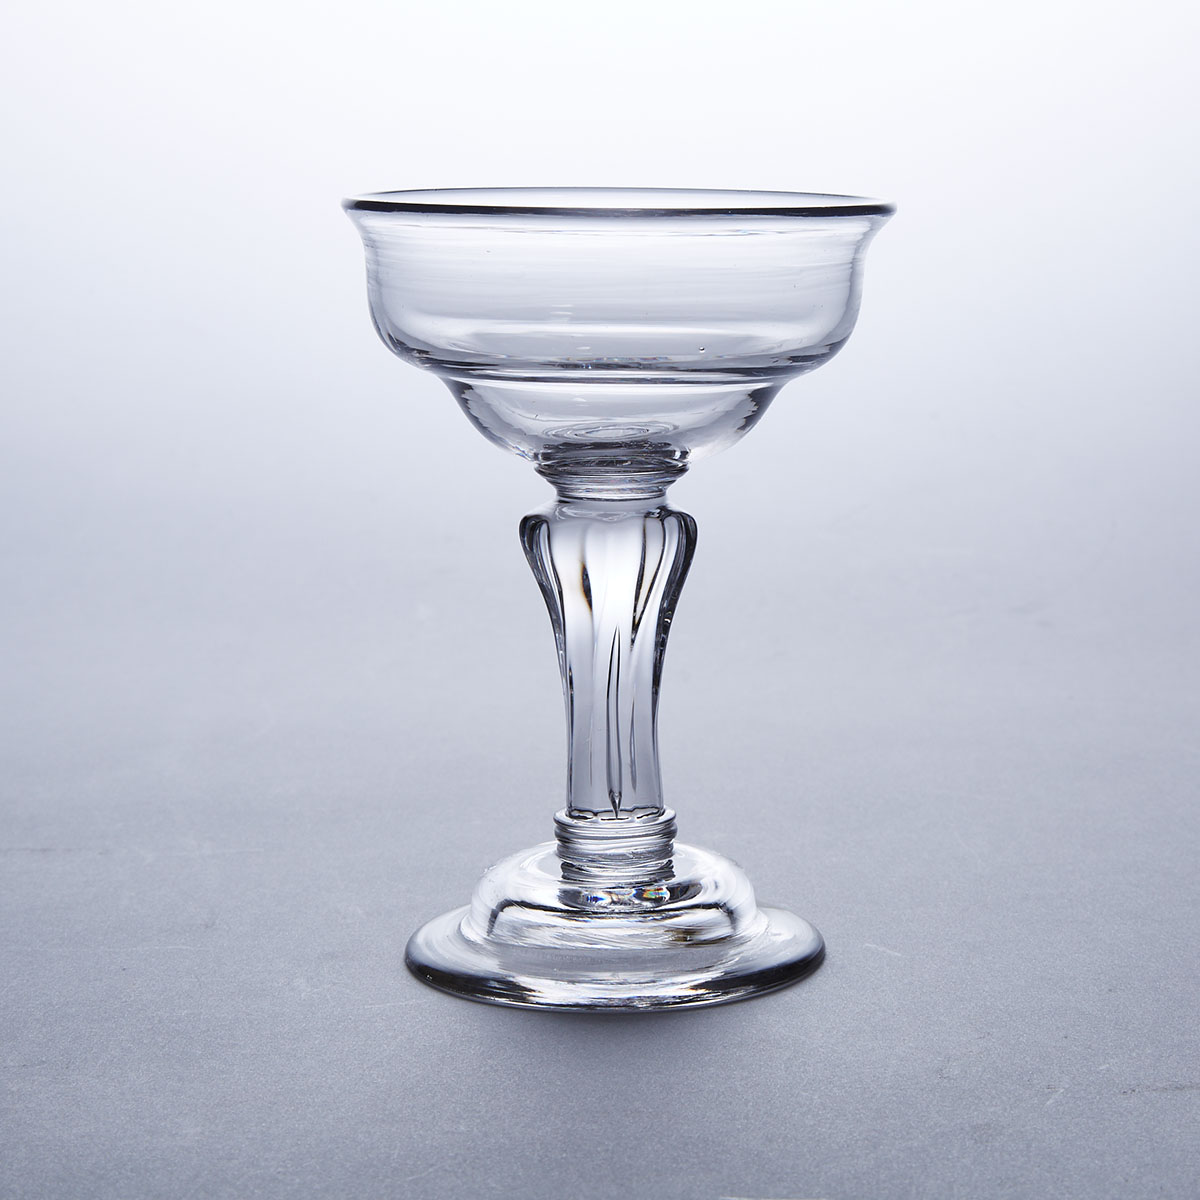 English Moulded Pedestal Stemmed Sweetmeat or Champagne Glass, c.1750-60